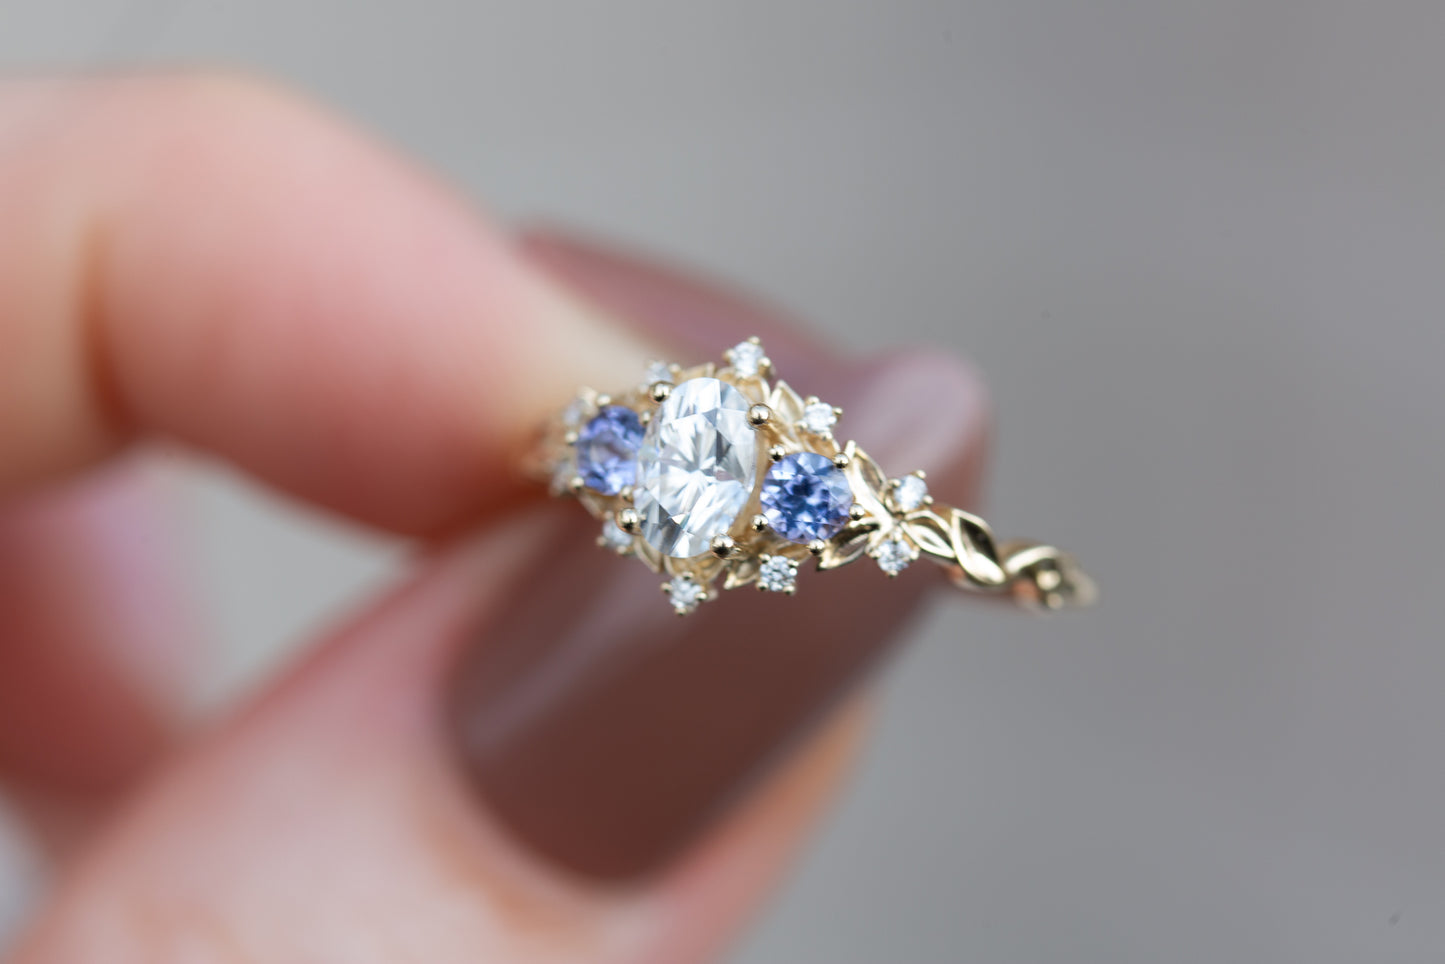 Briar rose three stone with oval moissanite and round tanzanite (fairy queen ring)